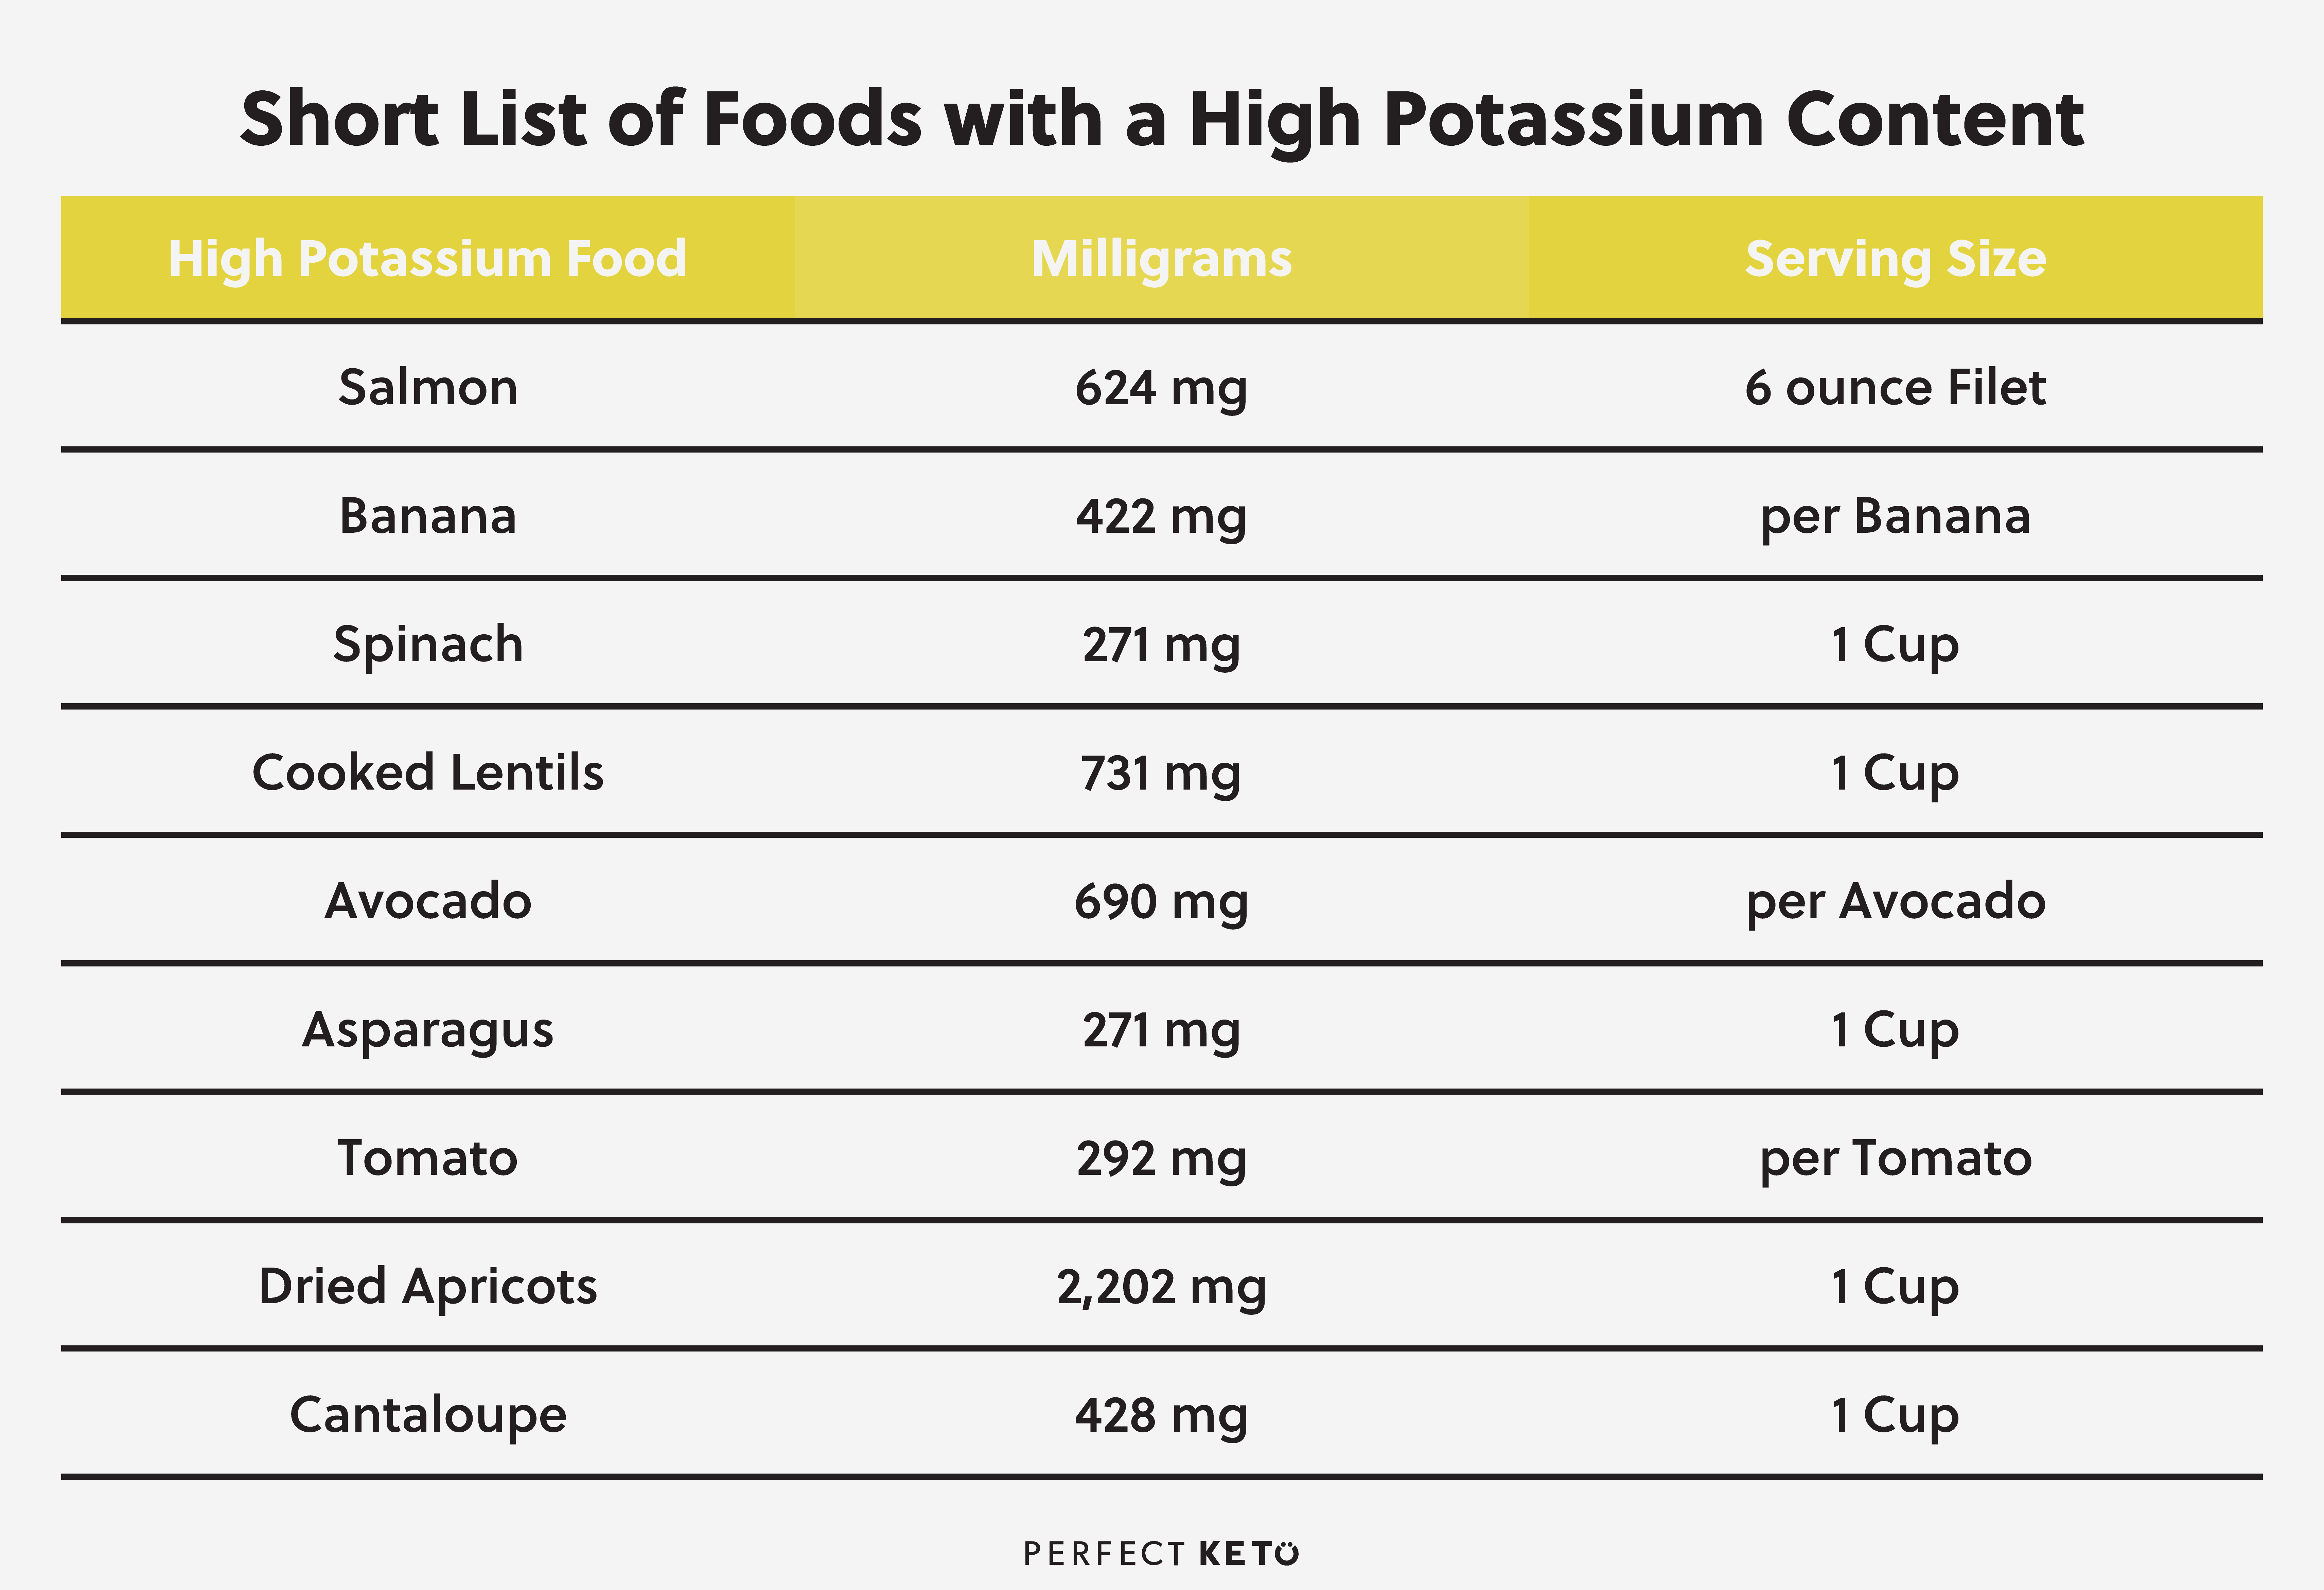 short-list-of-foods-with-a-high-potassium-content.jpg